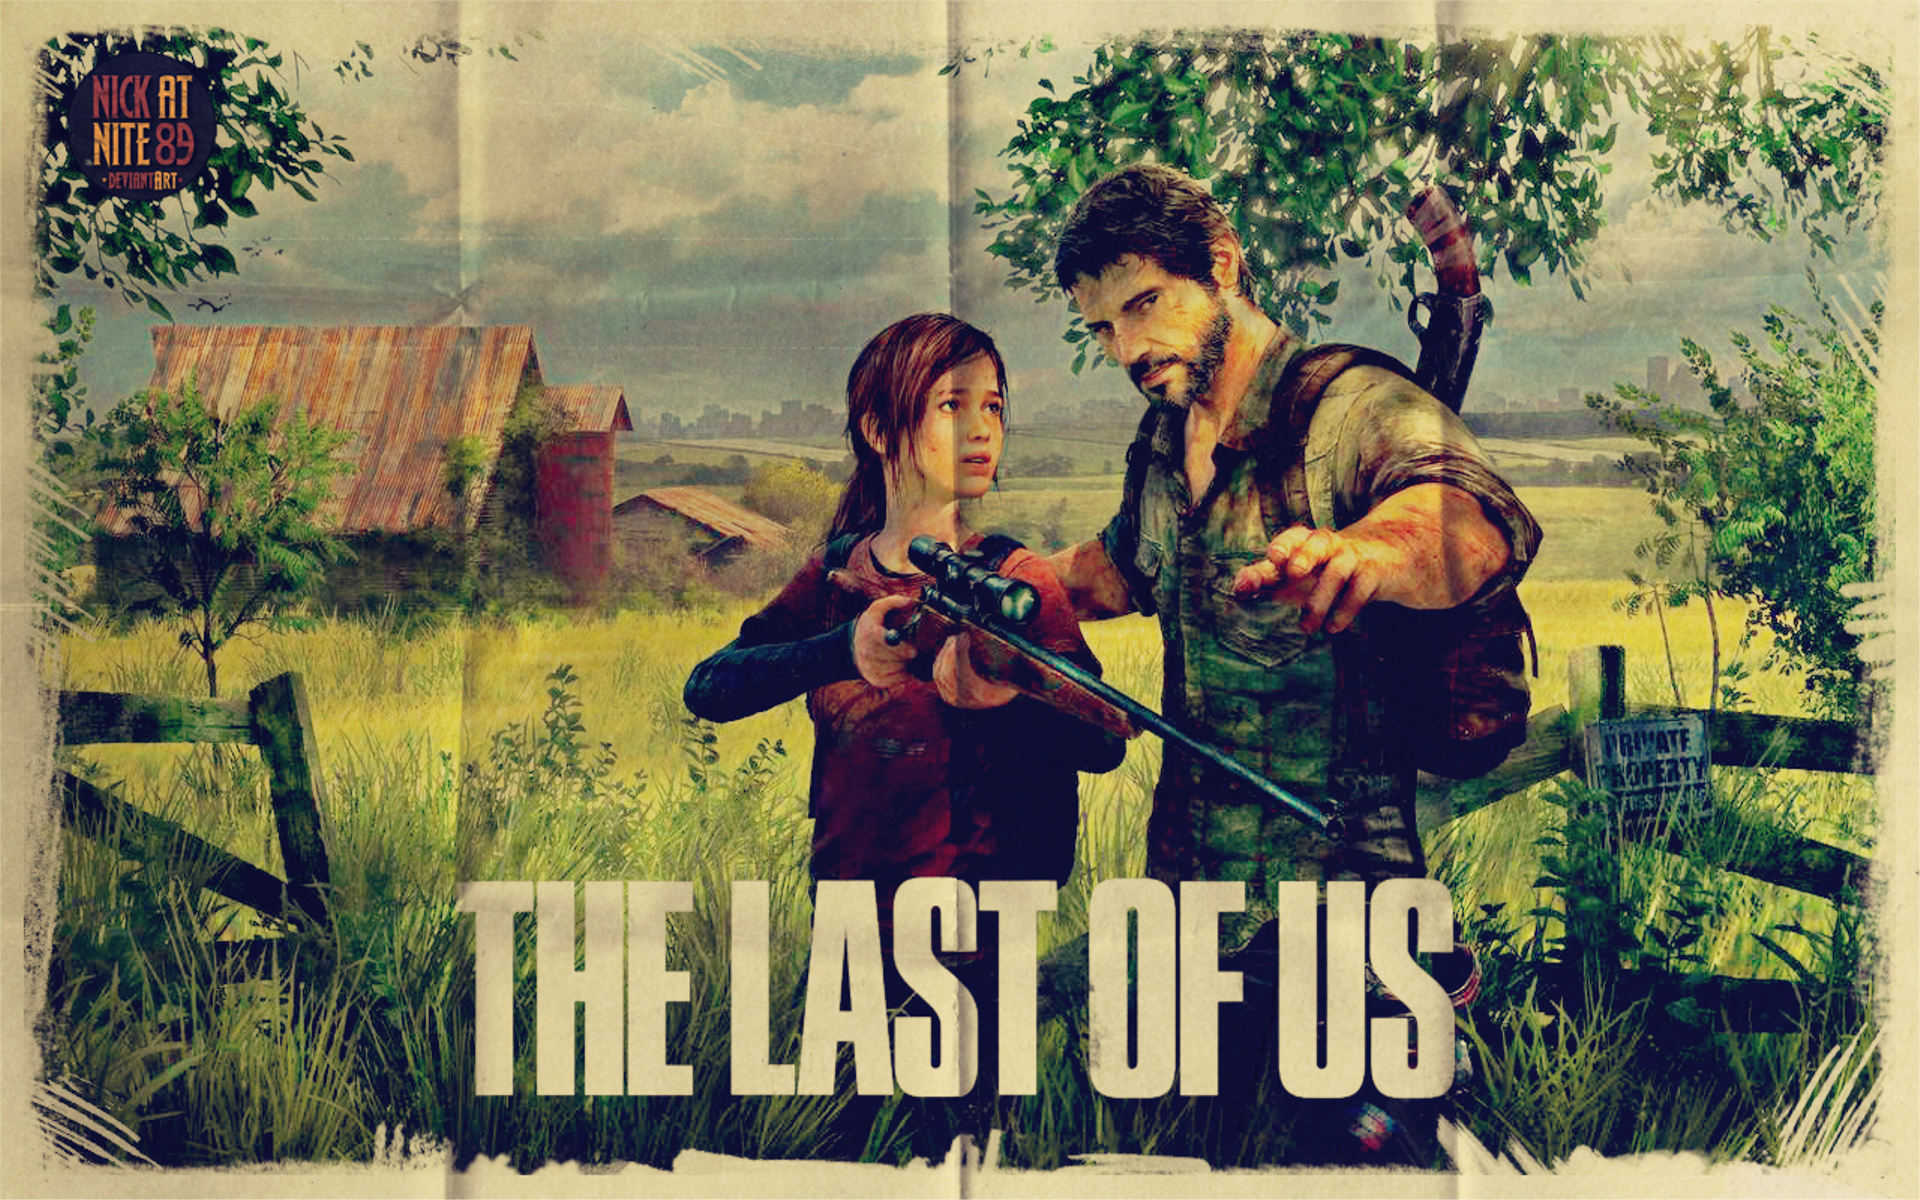 The Last Of Us Picture by NickatNite89